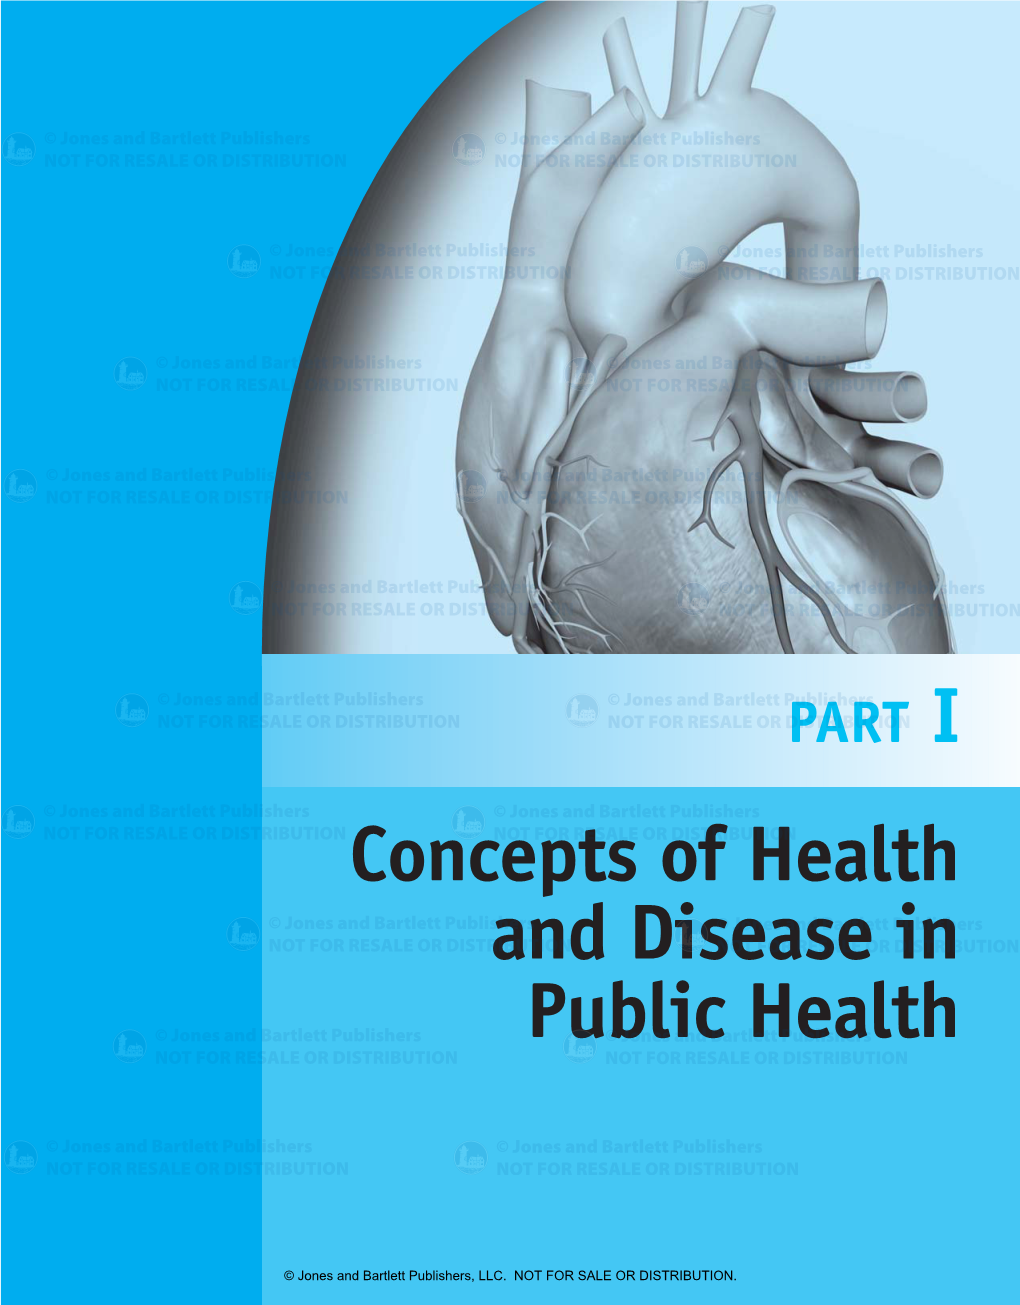 Concepts of Health and Disease in Public Health